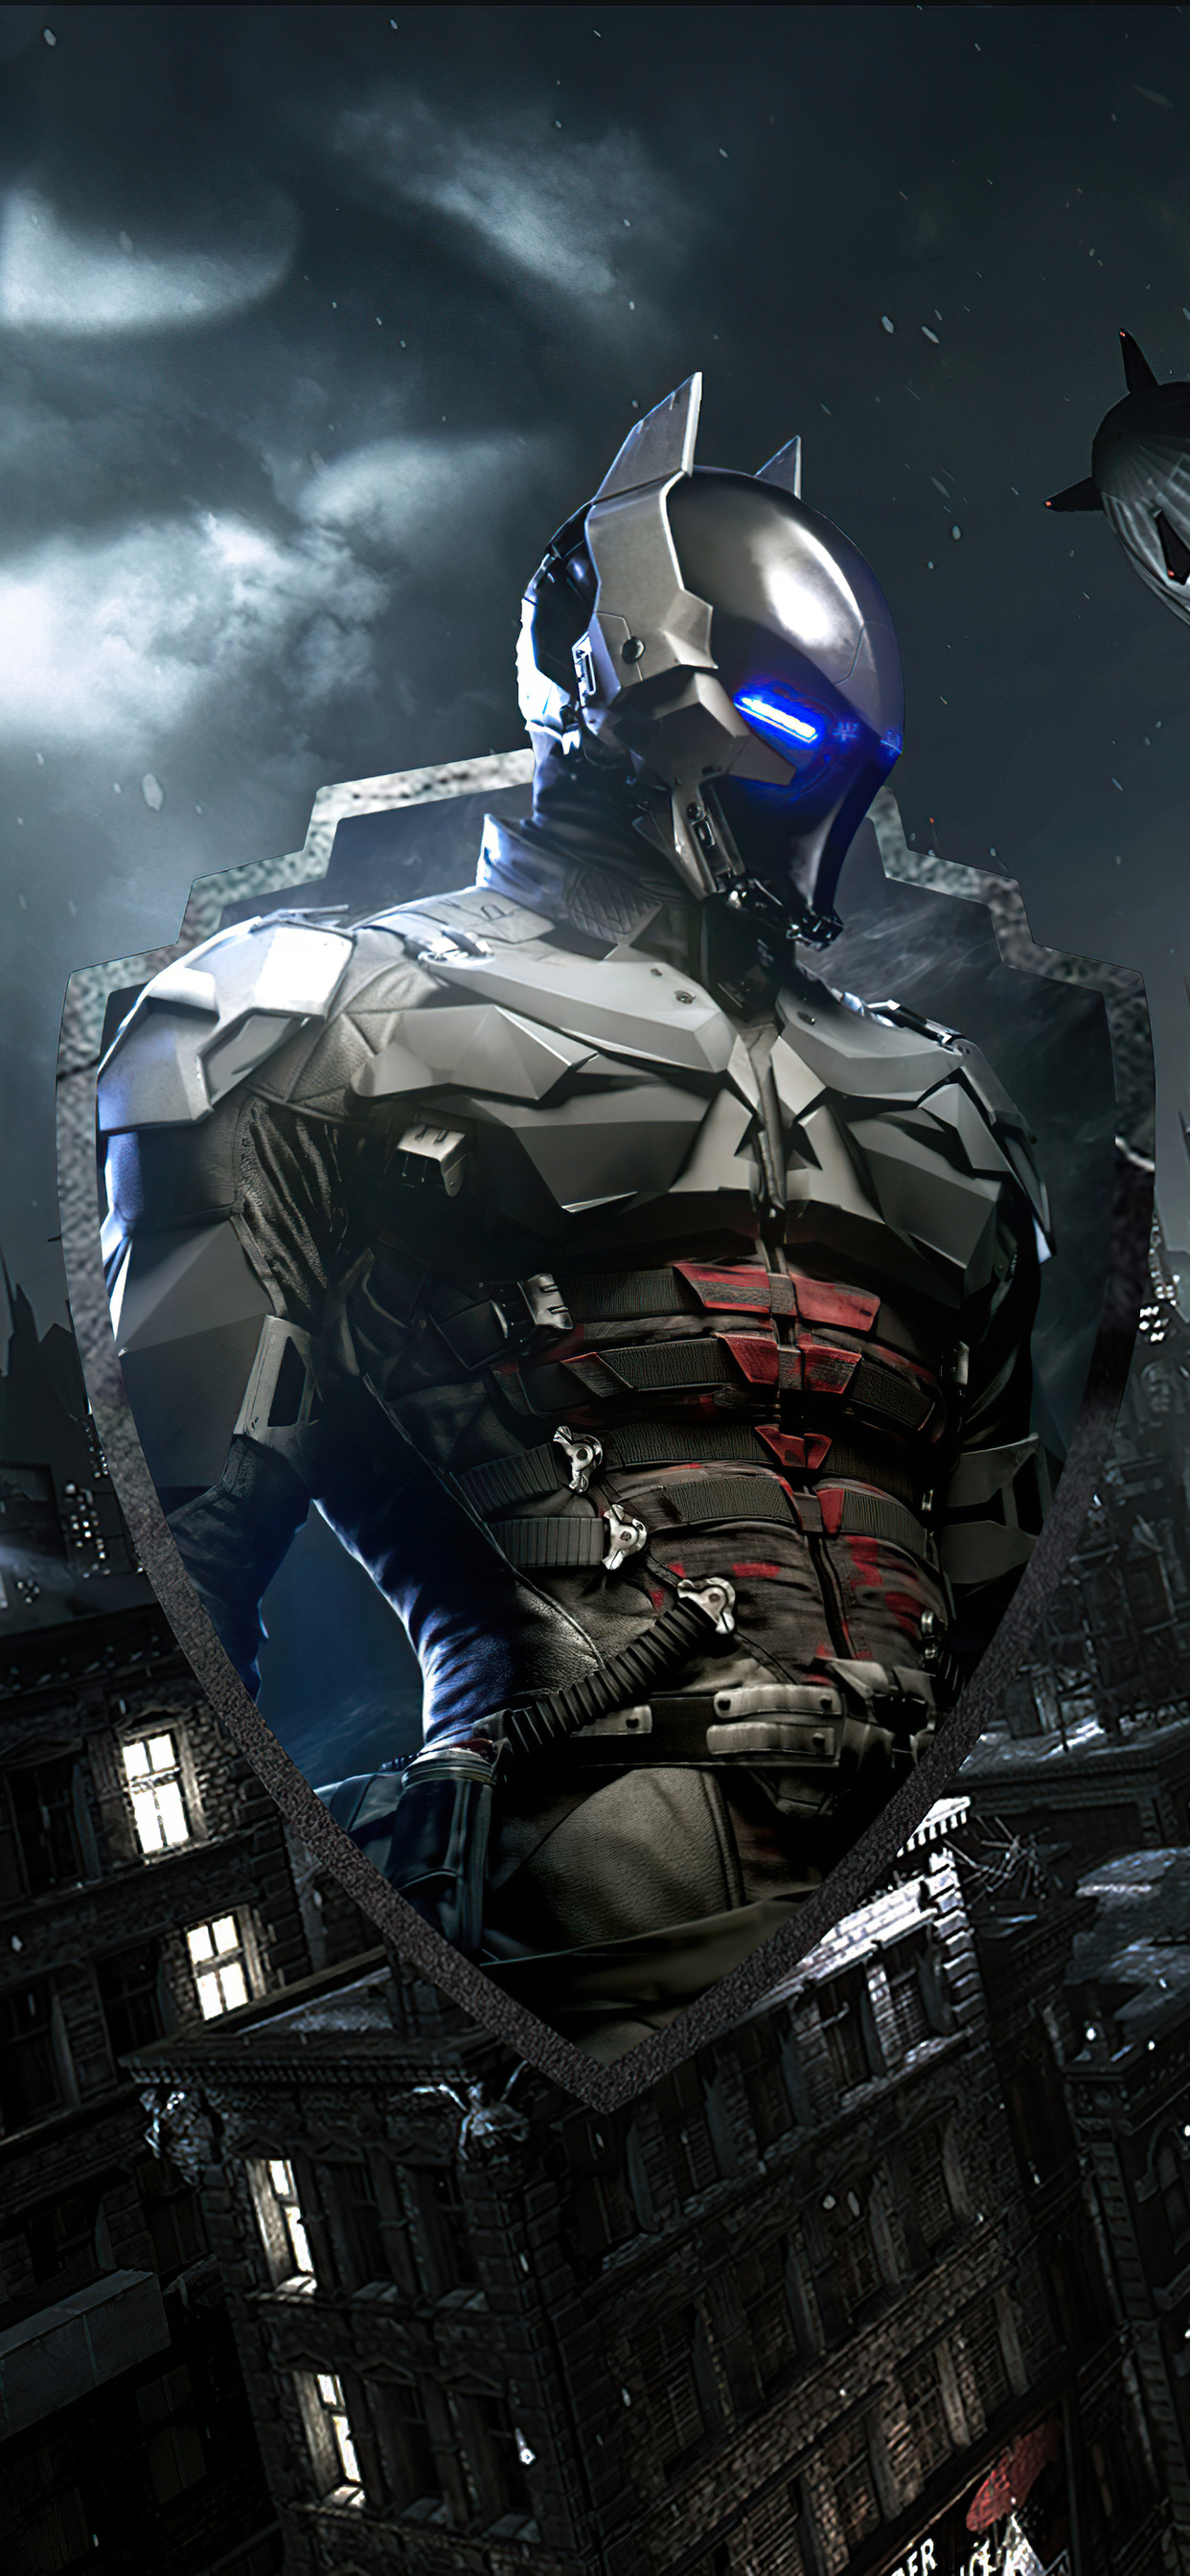 X batman arkham knight x warner bros k iphone xs max hd k wallpapers images backgrounds photos and pictures